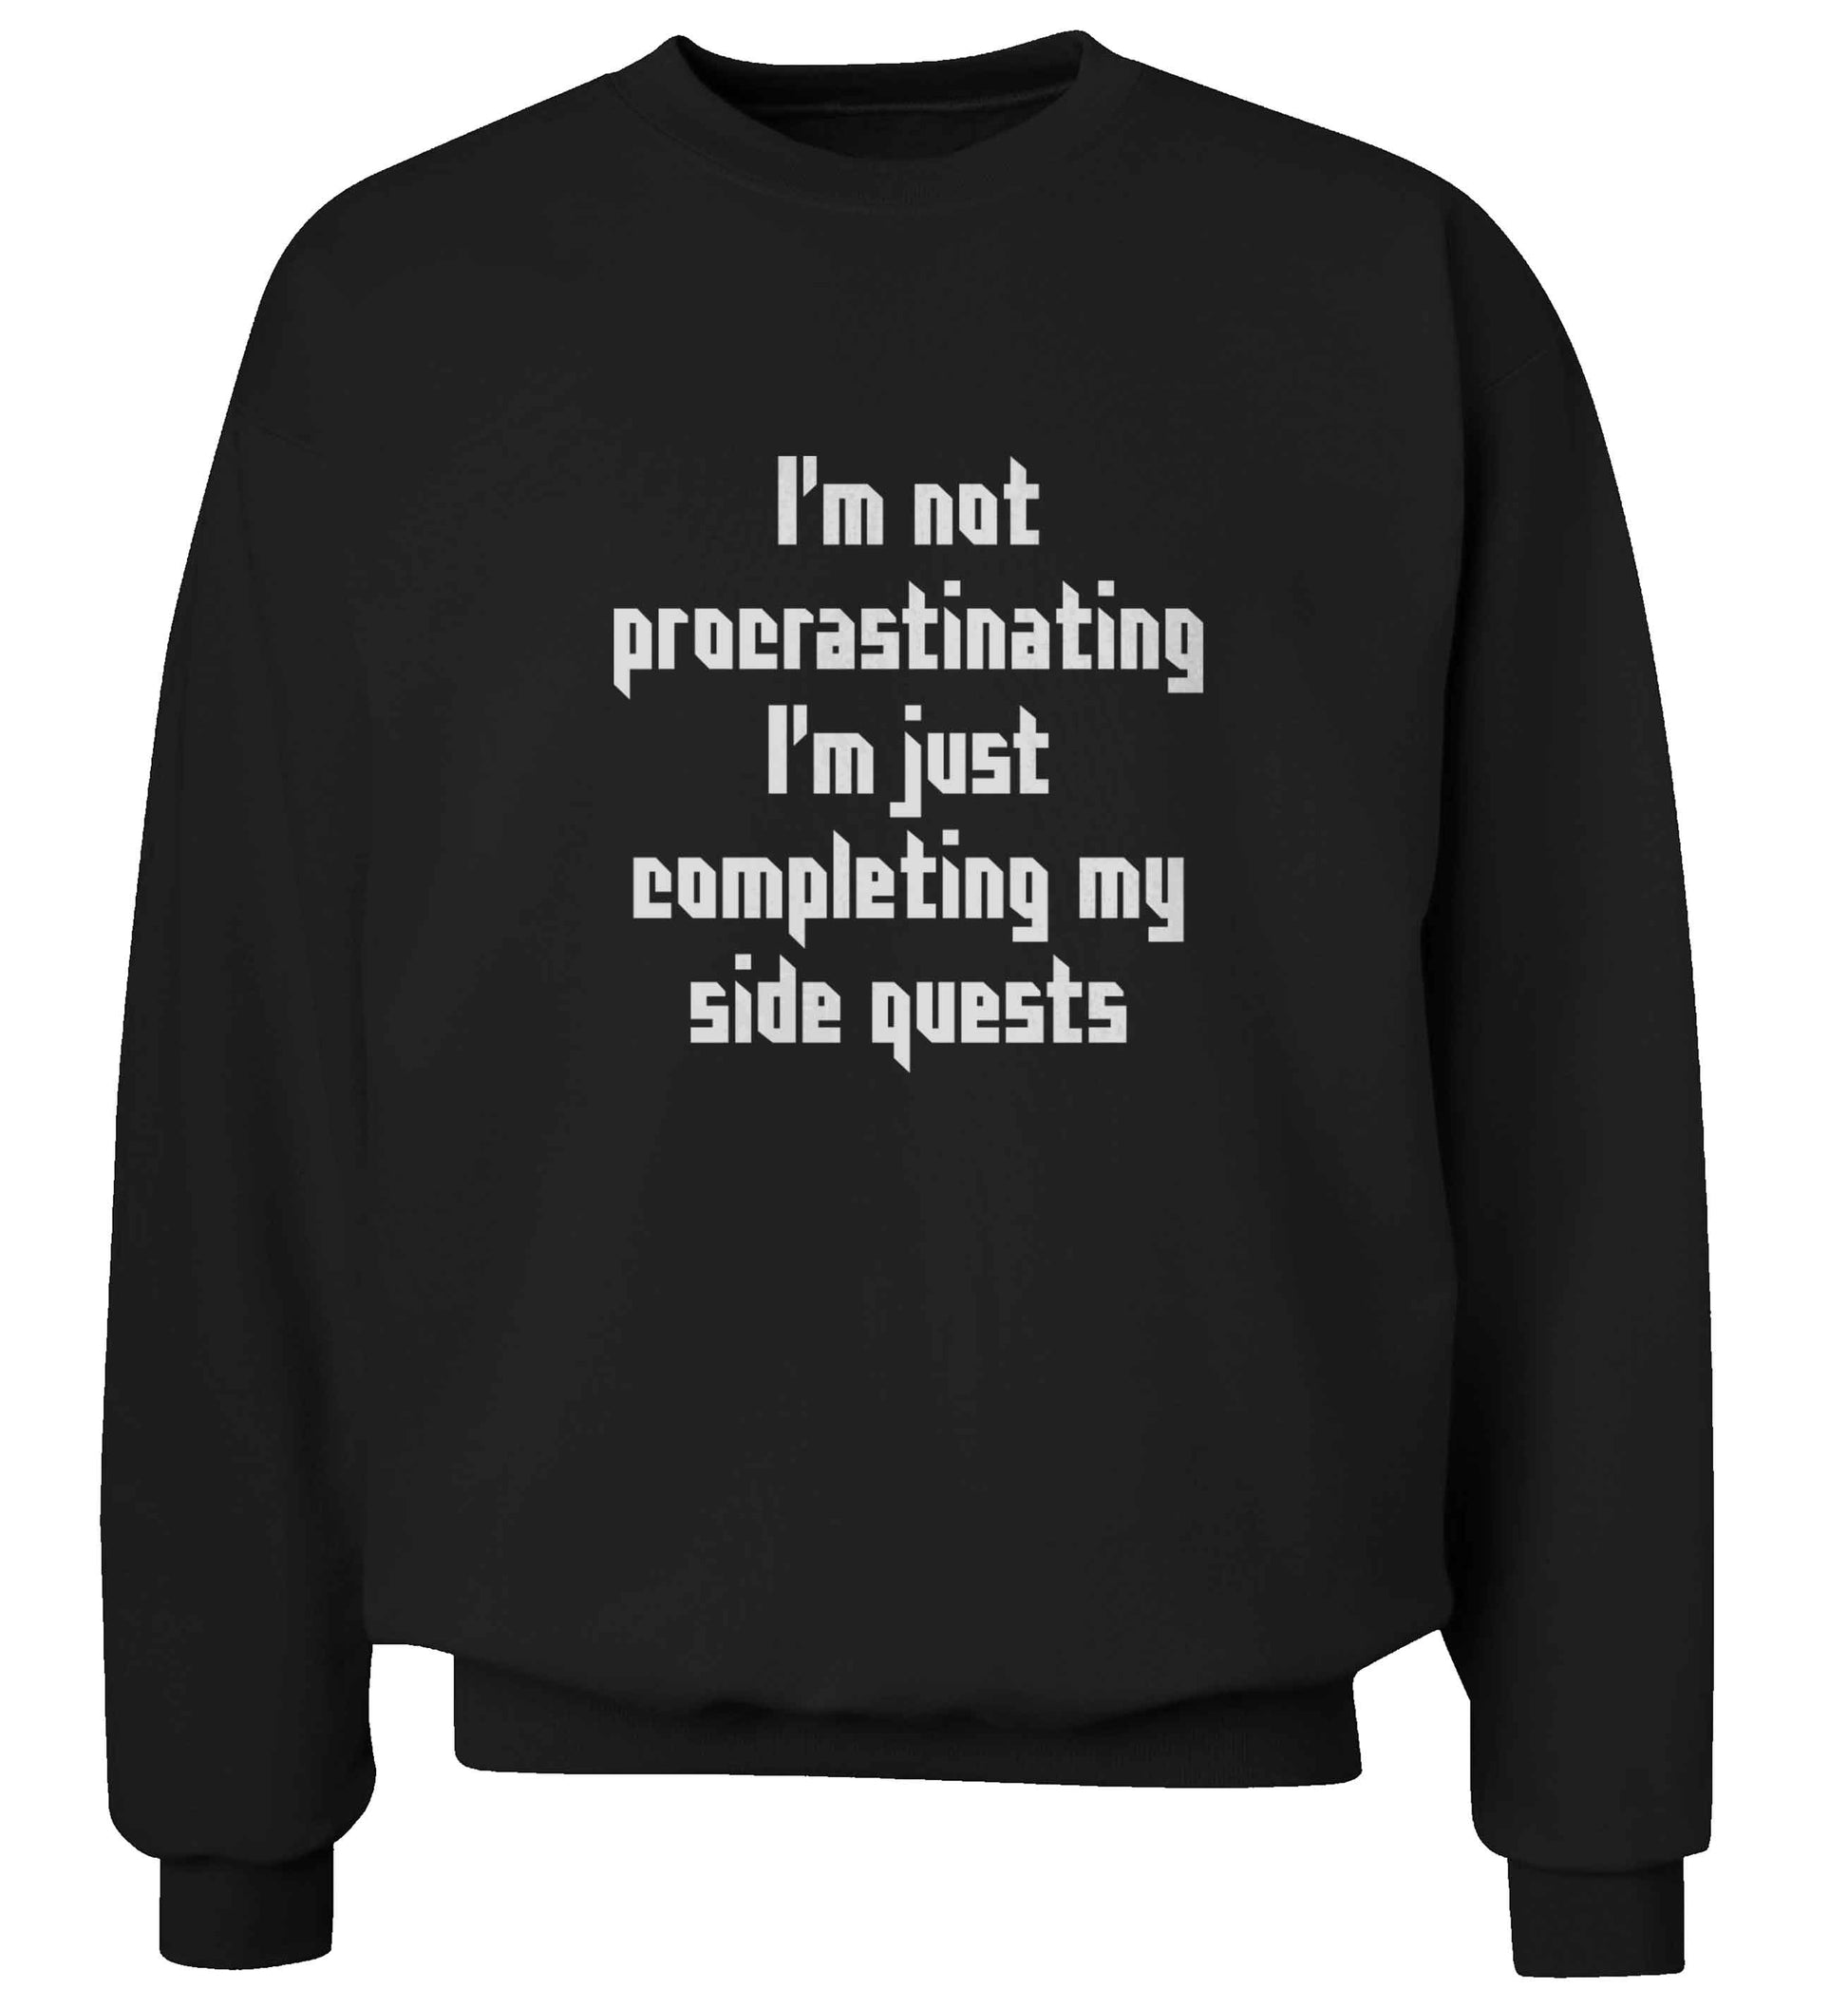 I'm not procrastinating I'm just completing my side quests adult's unisex black sweater 2XL